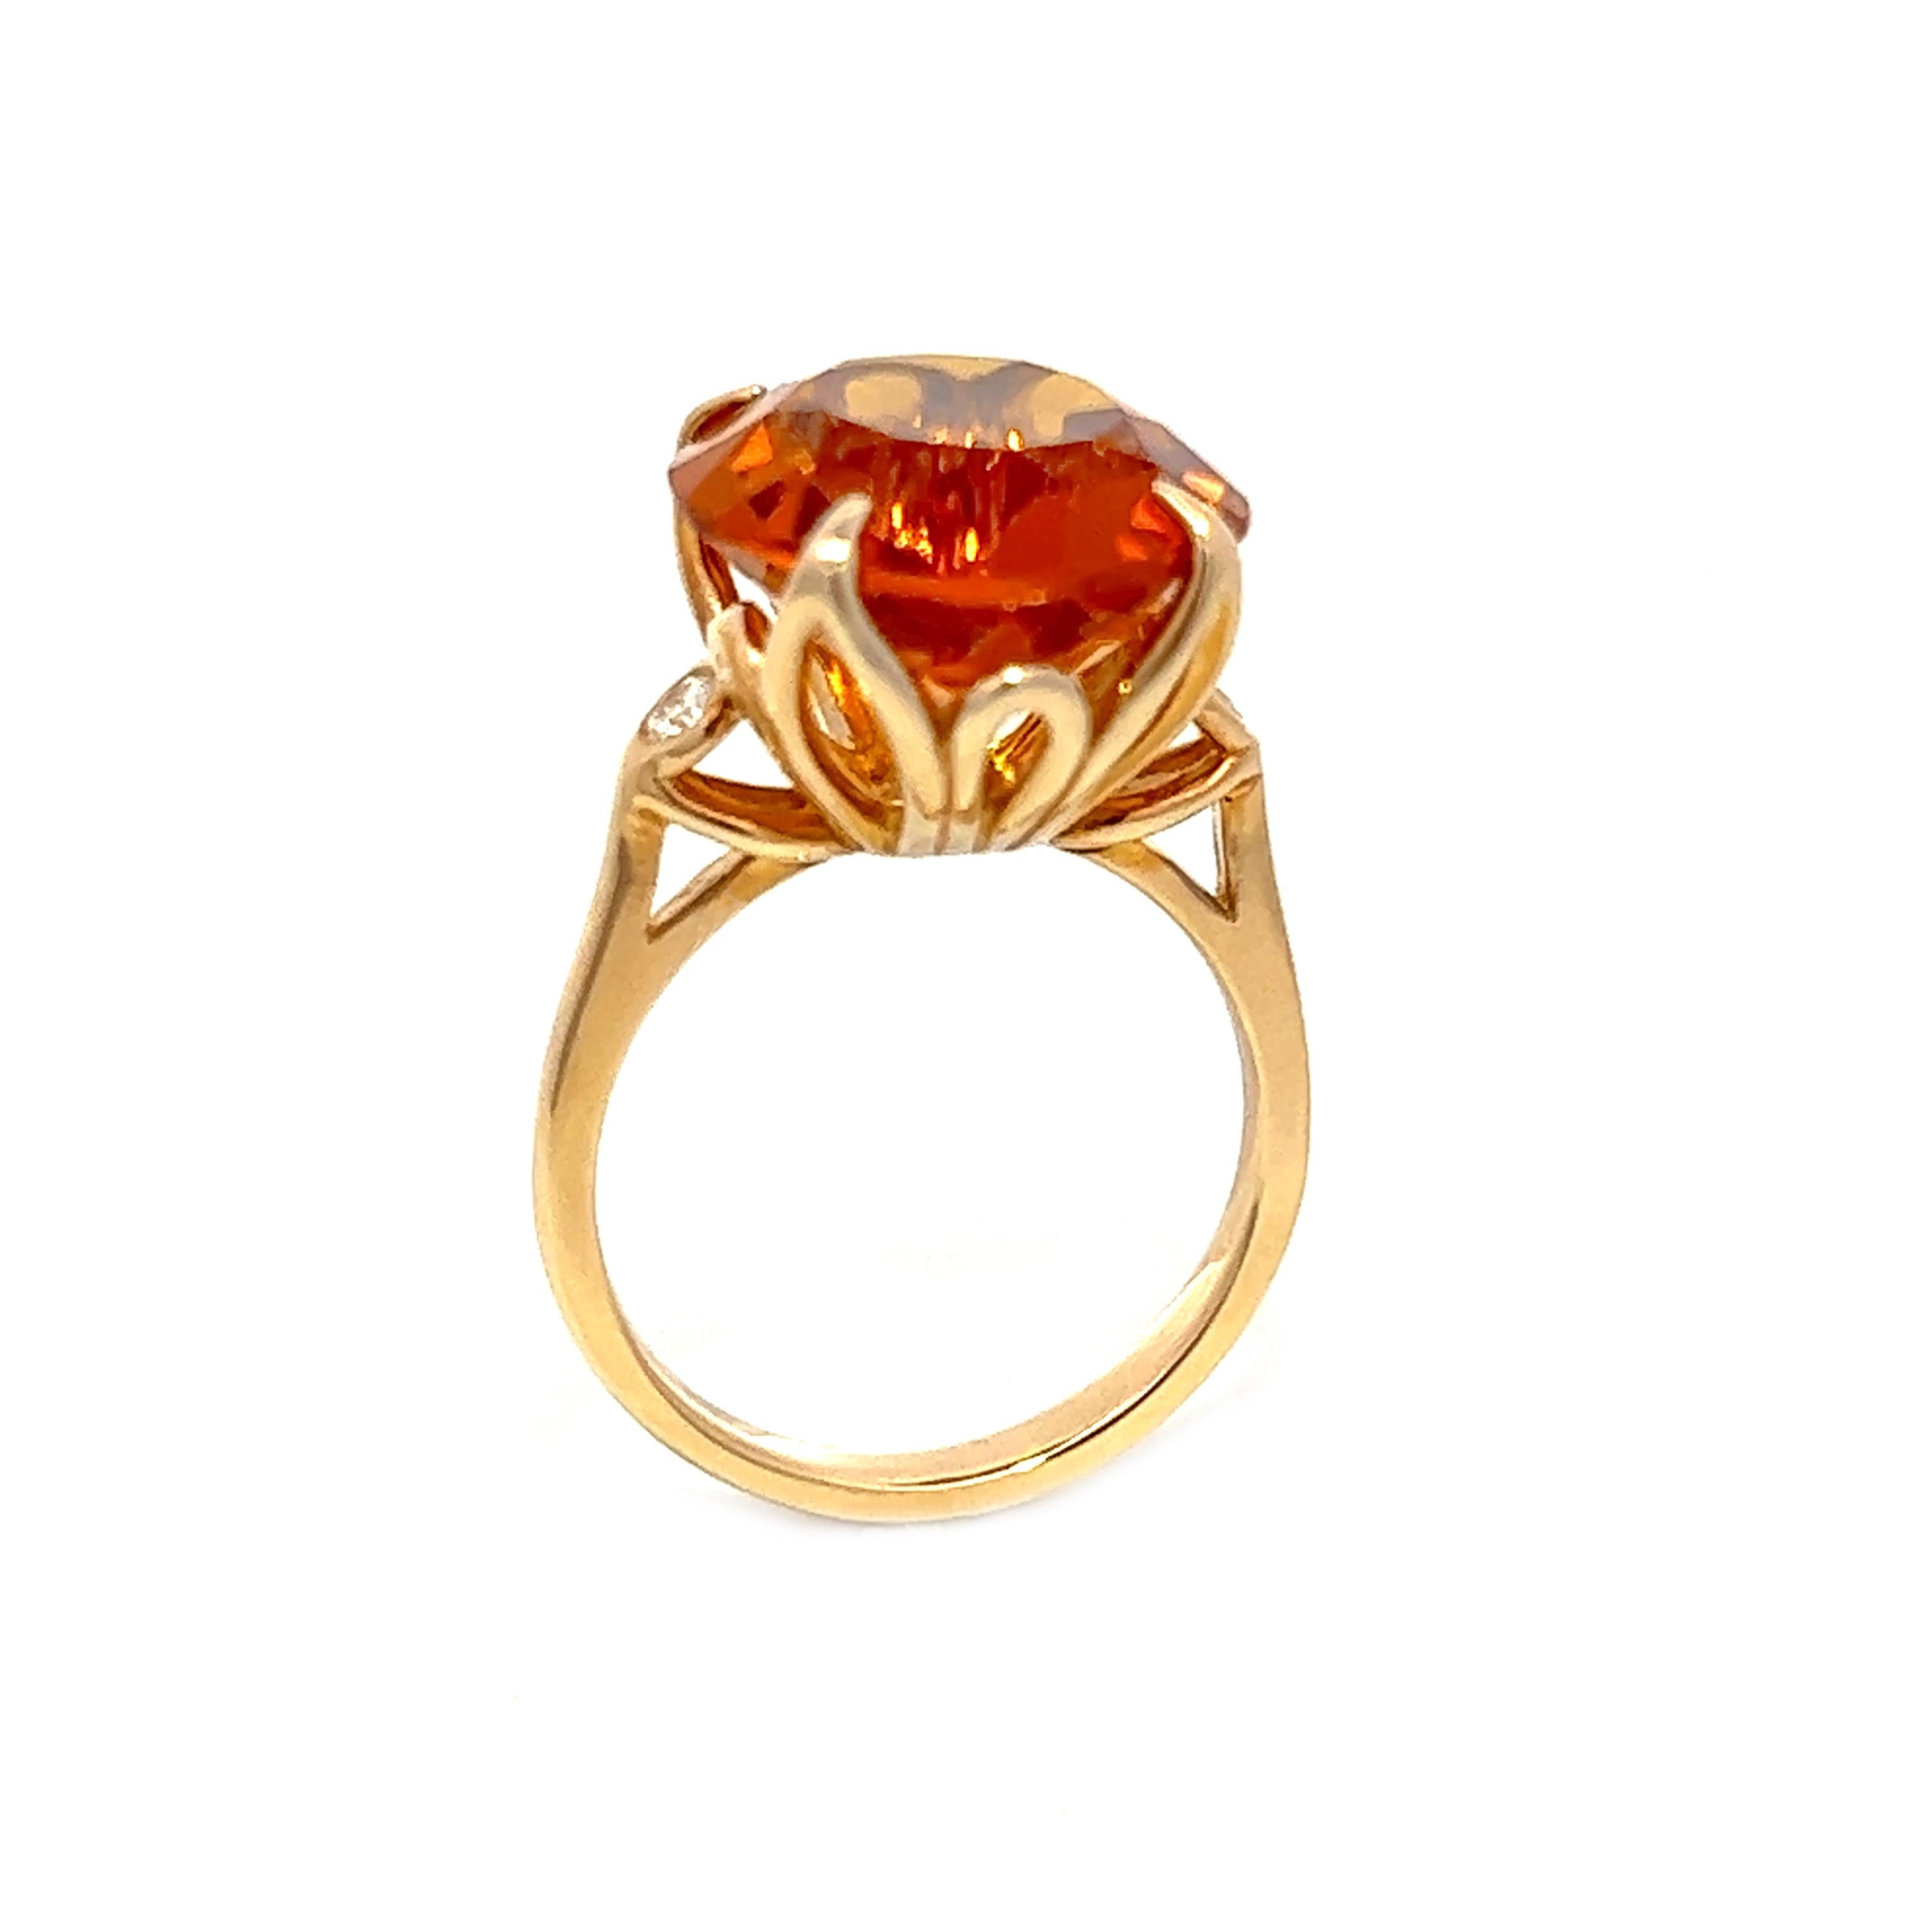 This 14K yellow gold ring is truly a one-of-a-kind piece, featuring a breathtaking 9.23CT orange topaz and two round brilliant diamonds totaling 0.10CT. The topaz is simply stunning and sure to turn heads.